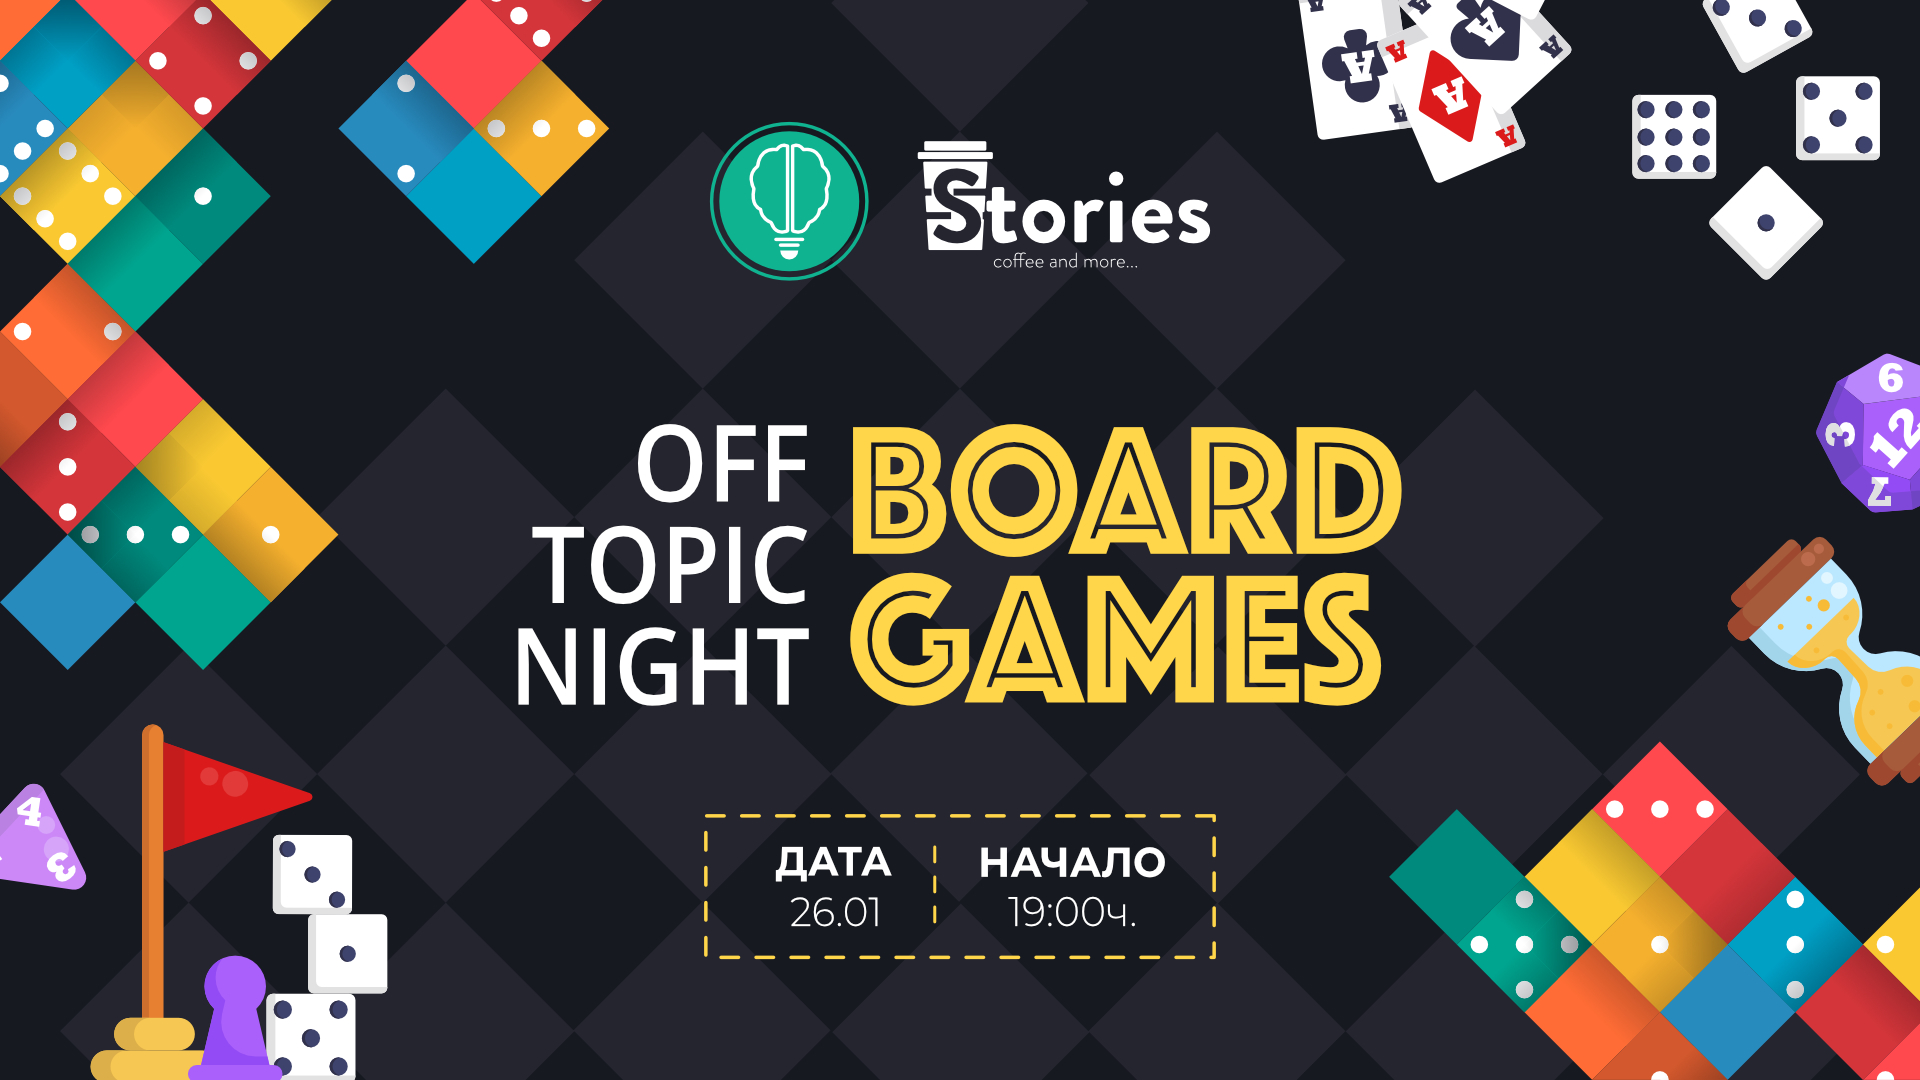 OFF Topic | Board Games Night 11 | Innovator Coworking Space